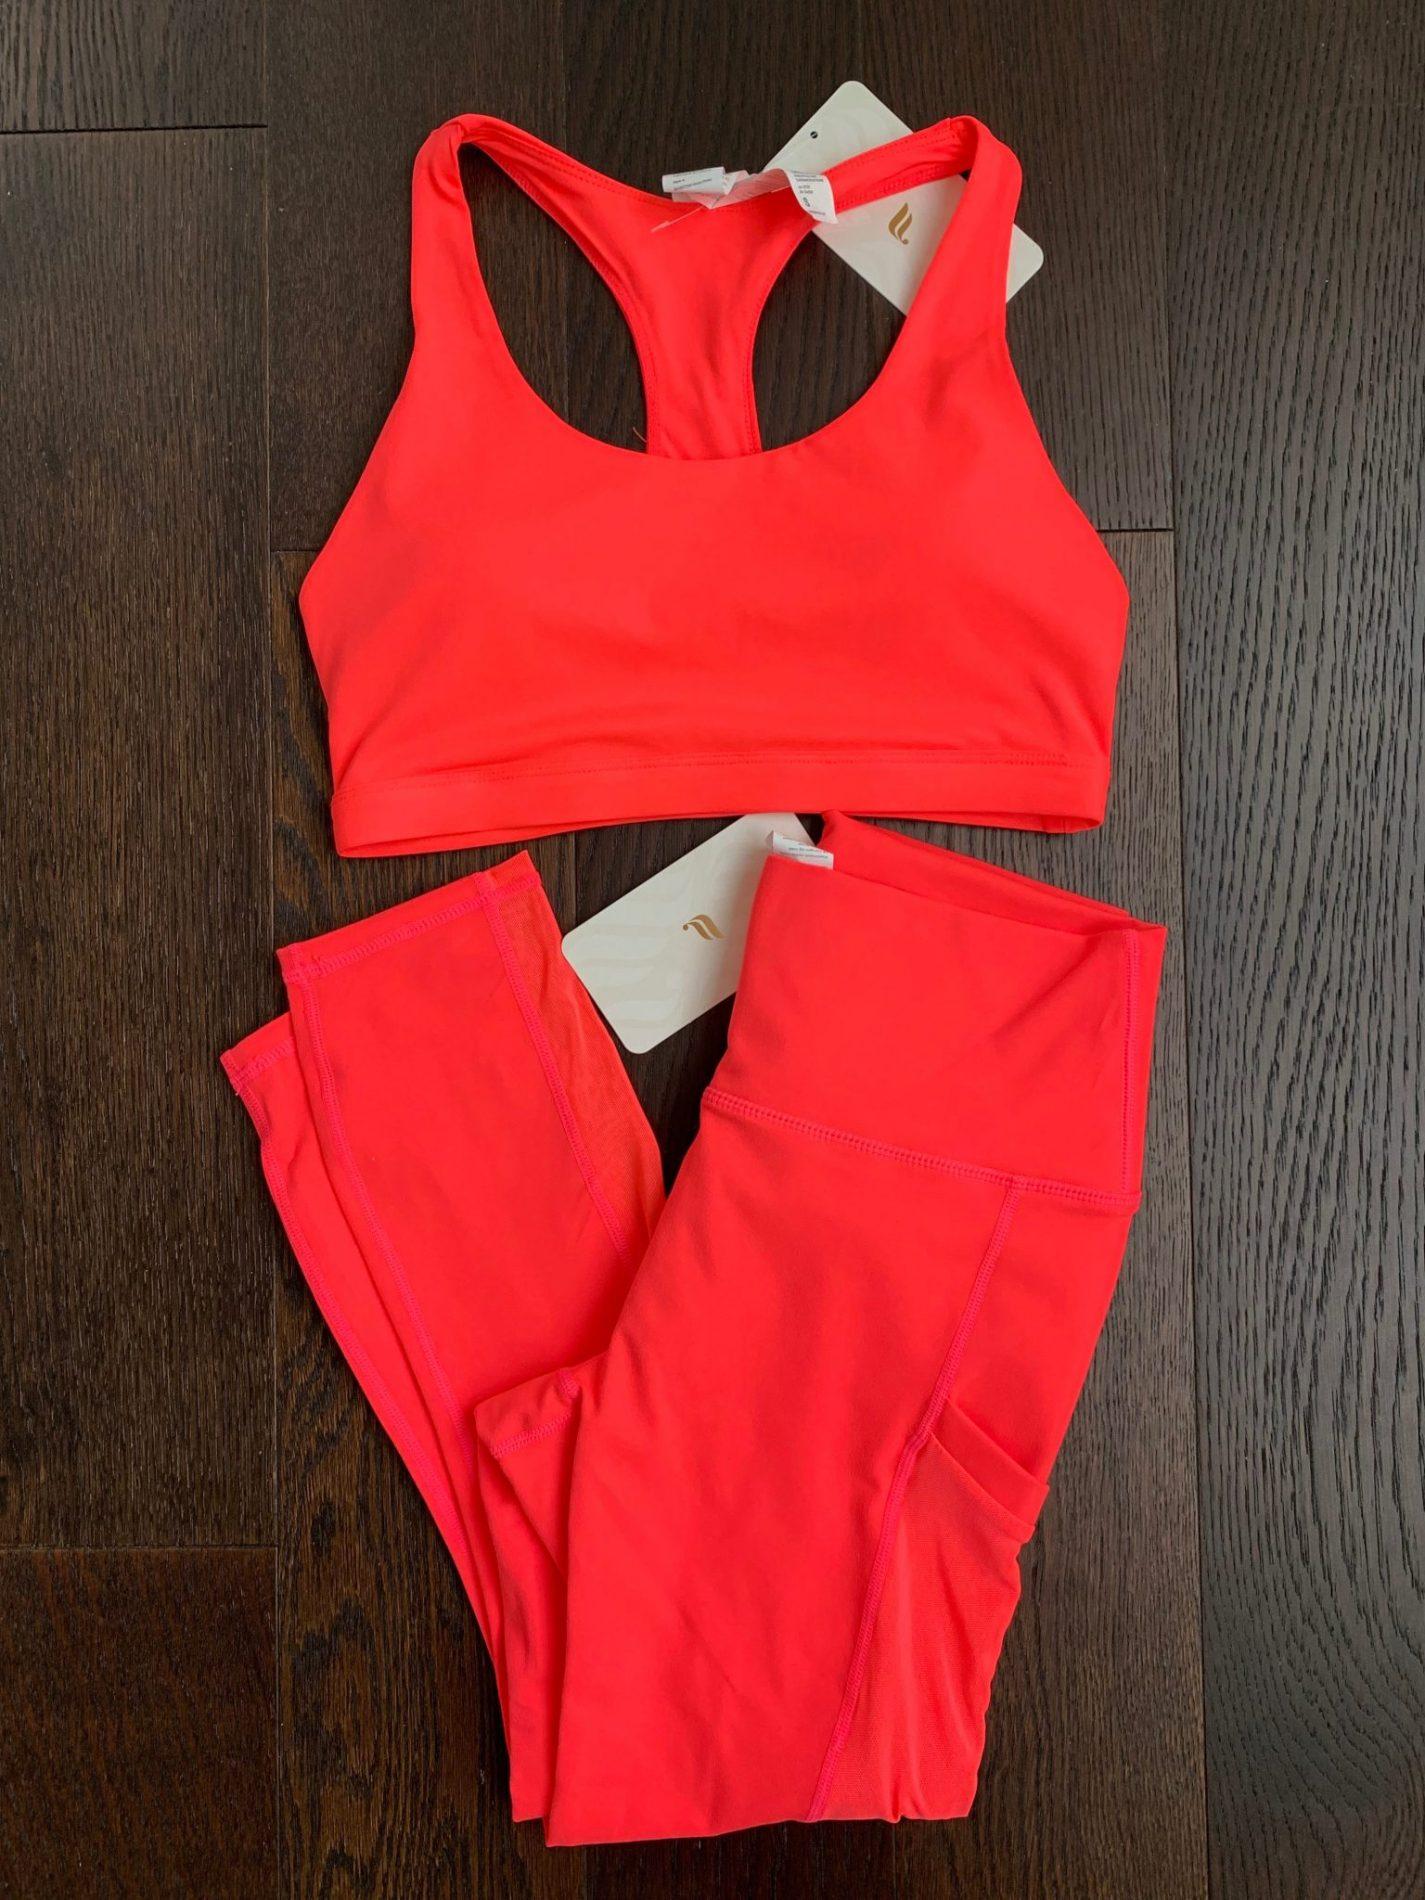 Read more about the article Fabletics Subscription Review – June 2019 + 2 for $24 Leggings Offer